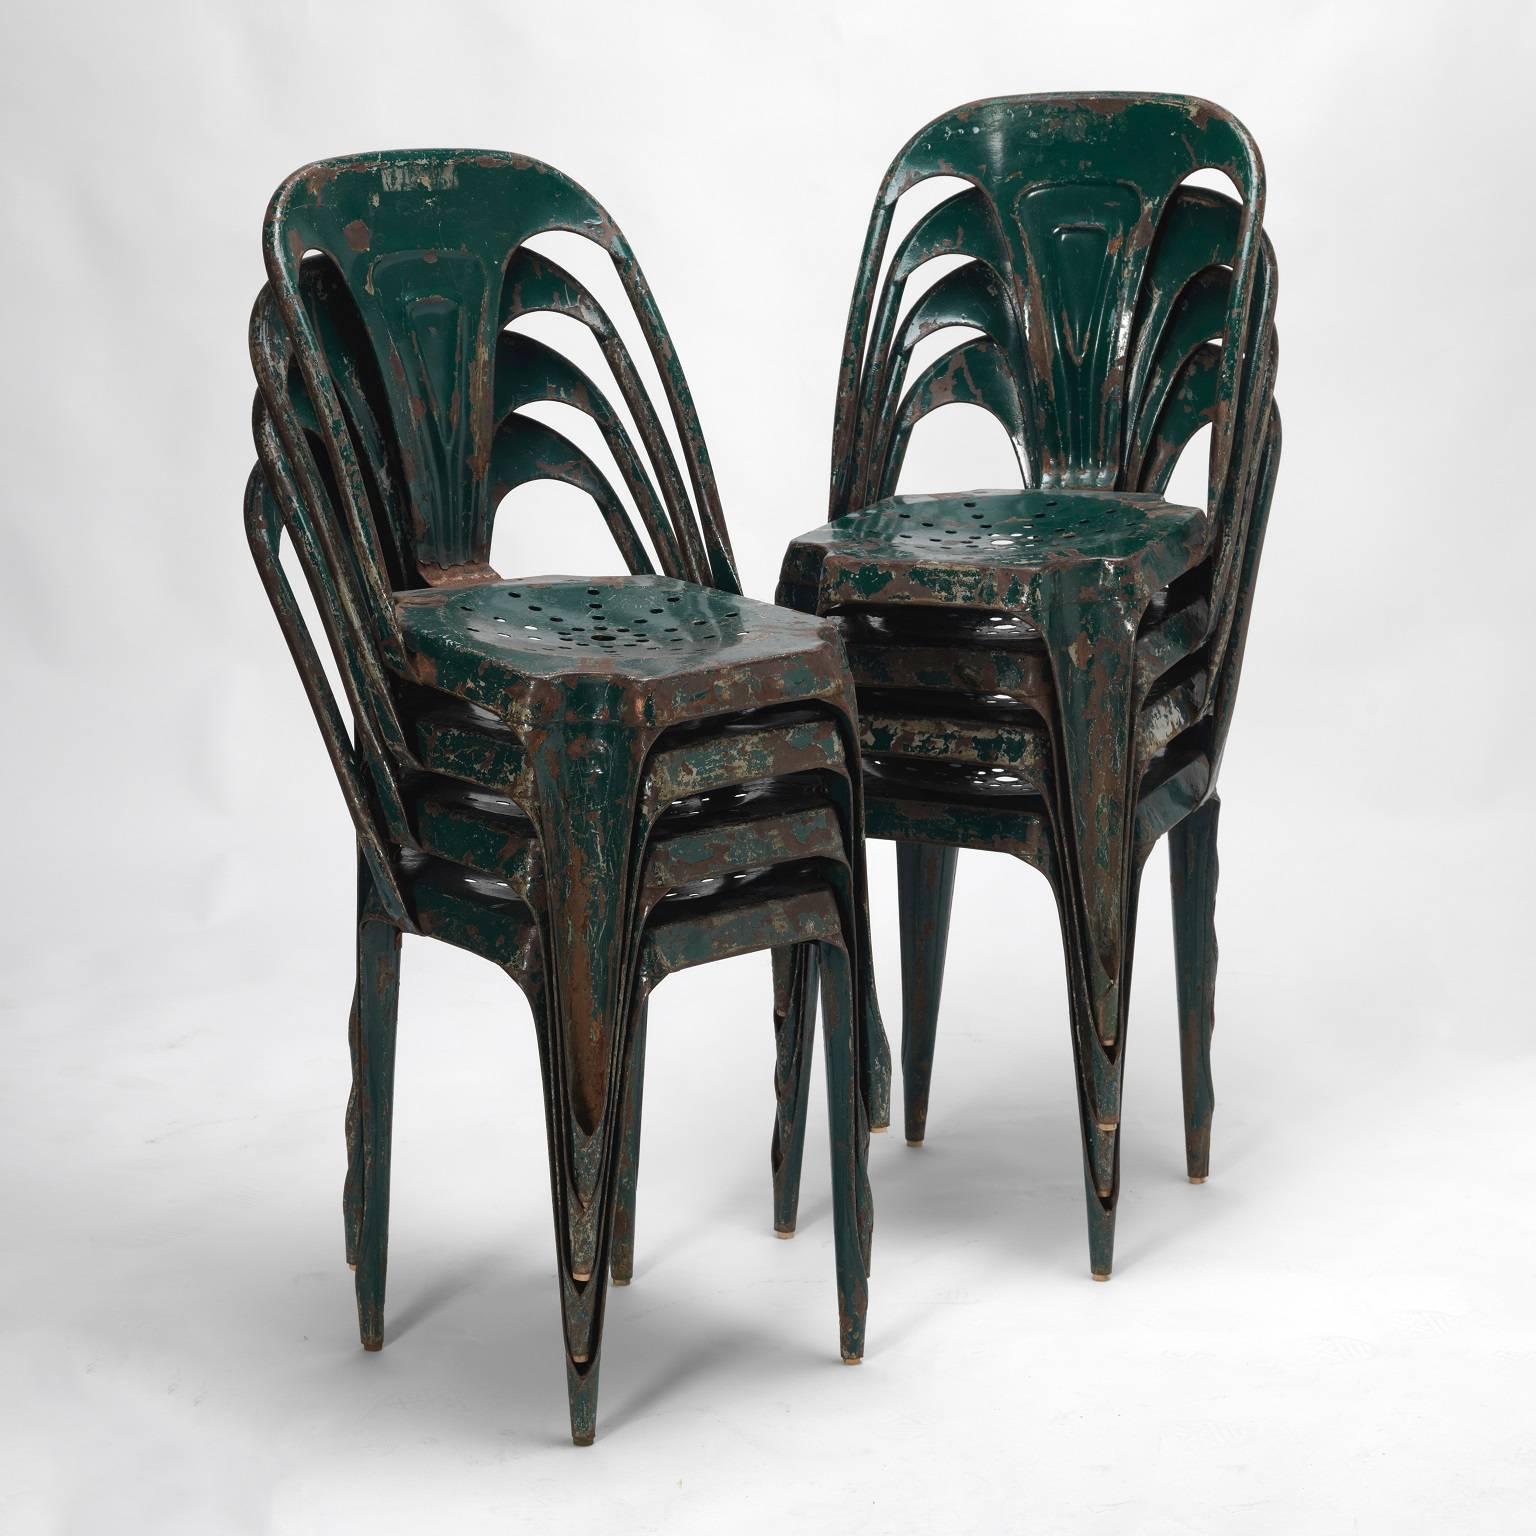 Rare 1950s Tolix Industrial steel structure chairs. One of the first stackable and stainless terrace chairs, known as the Belgian Tolix.

These fantastic original set of eight green Industrial stackable metal bistro chairs. They are in very good